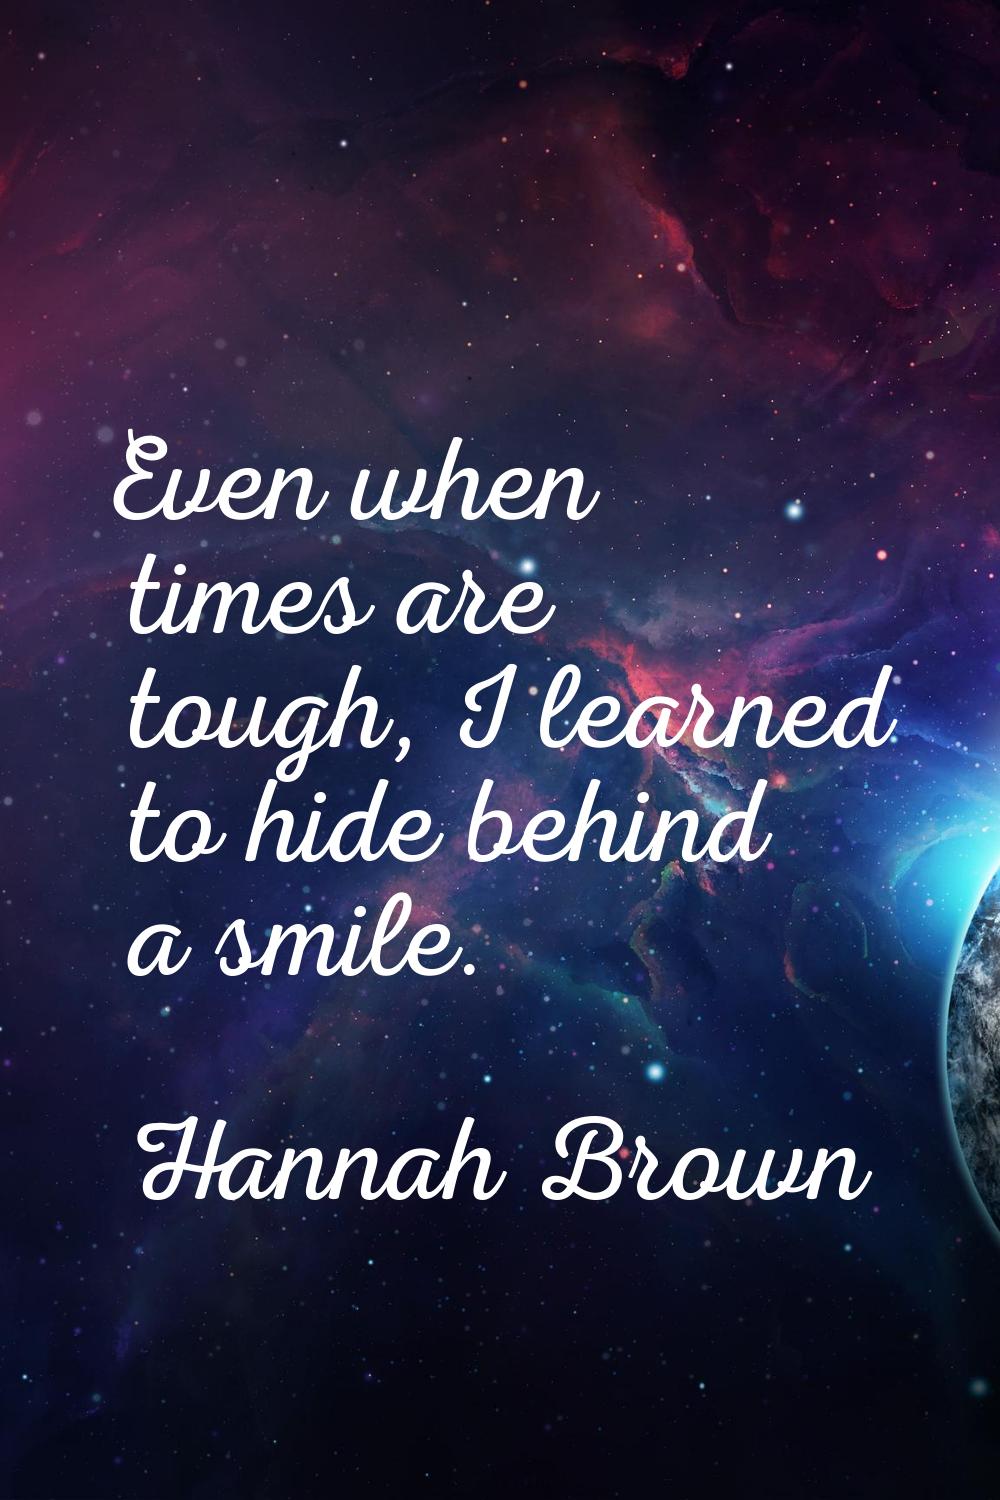 Even when times are tough, I learned to hide behind a smile.